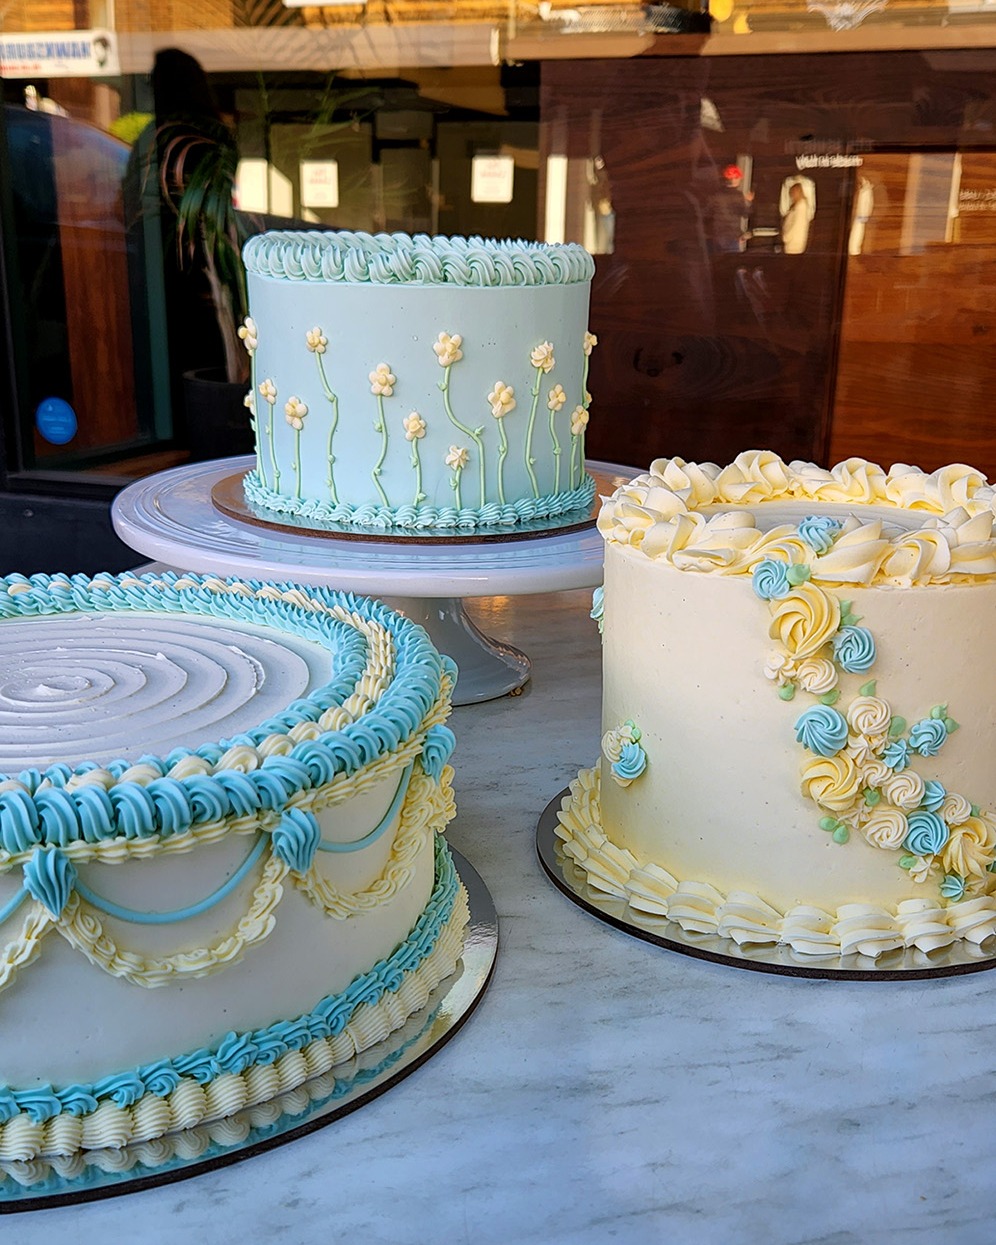 The best cake shop in every state | lovefood.com